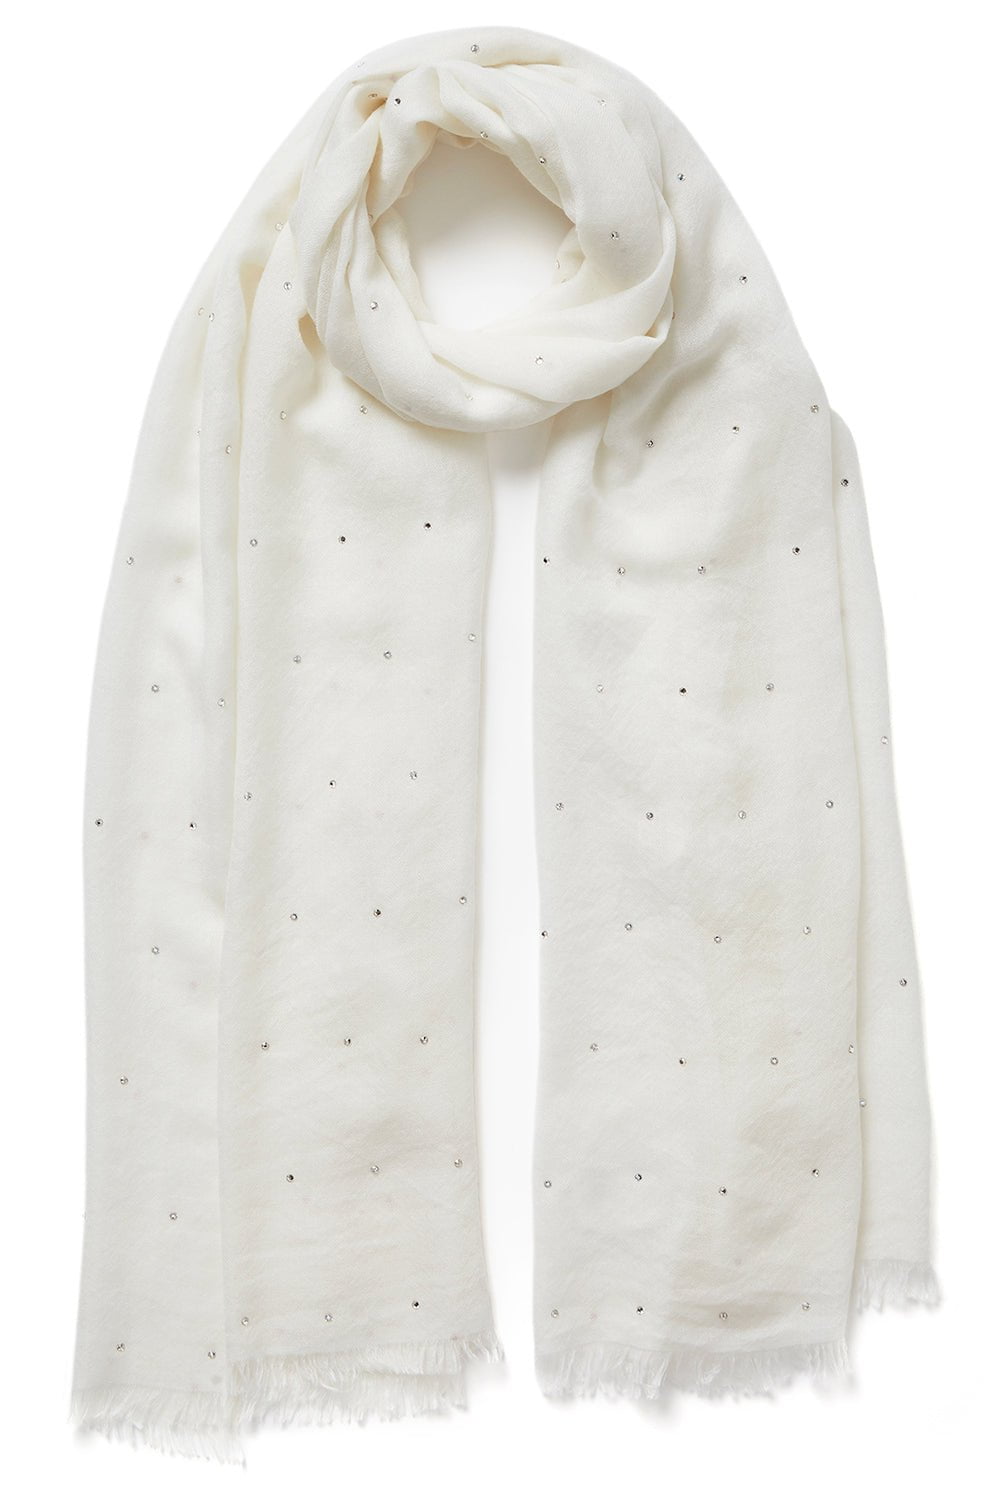 JANE CARR-The Crystal Scarf - White-WHITE